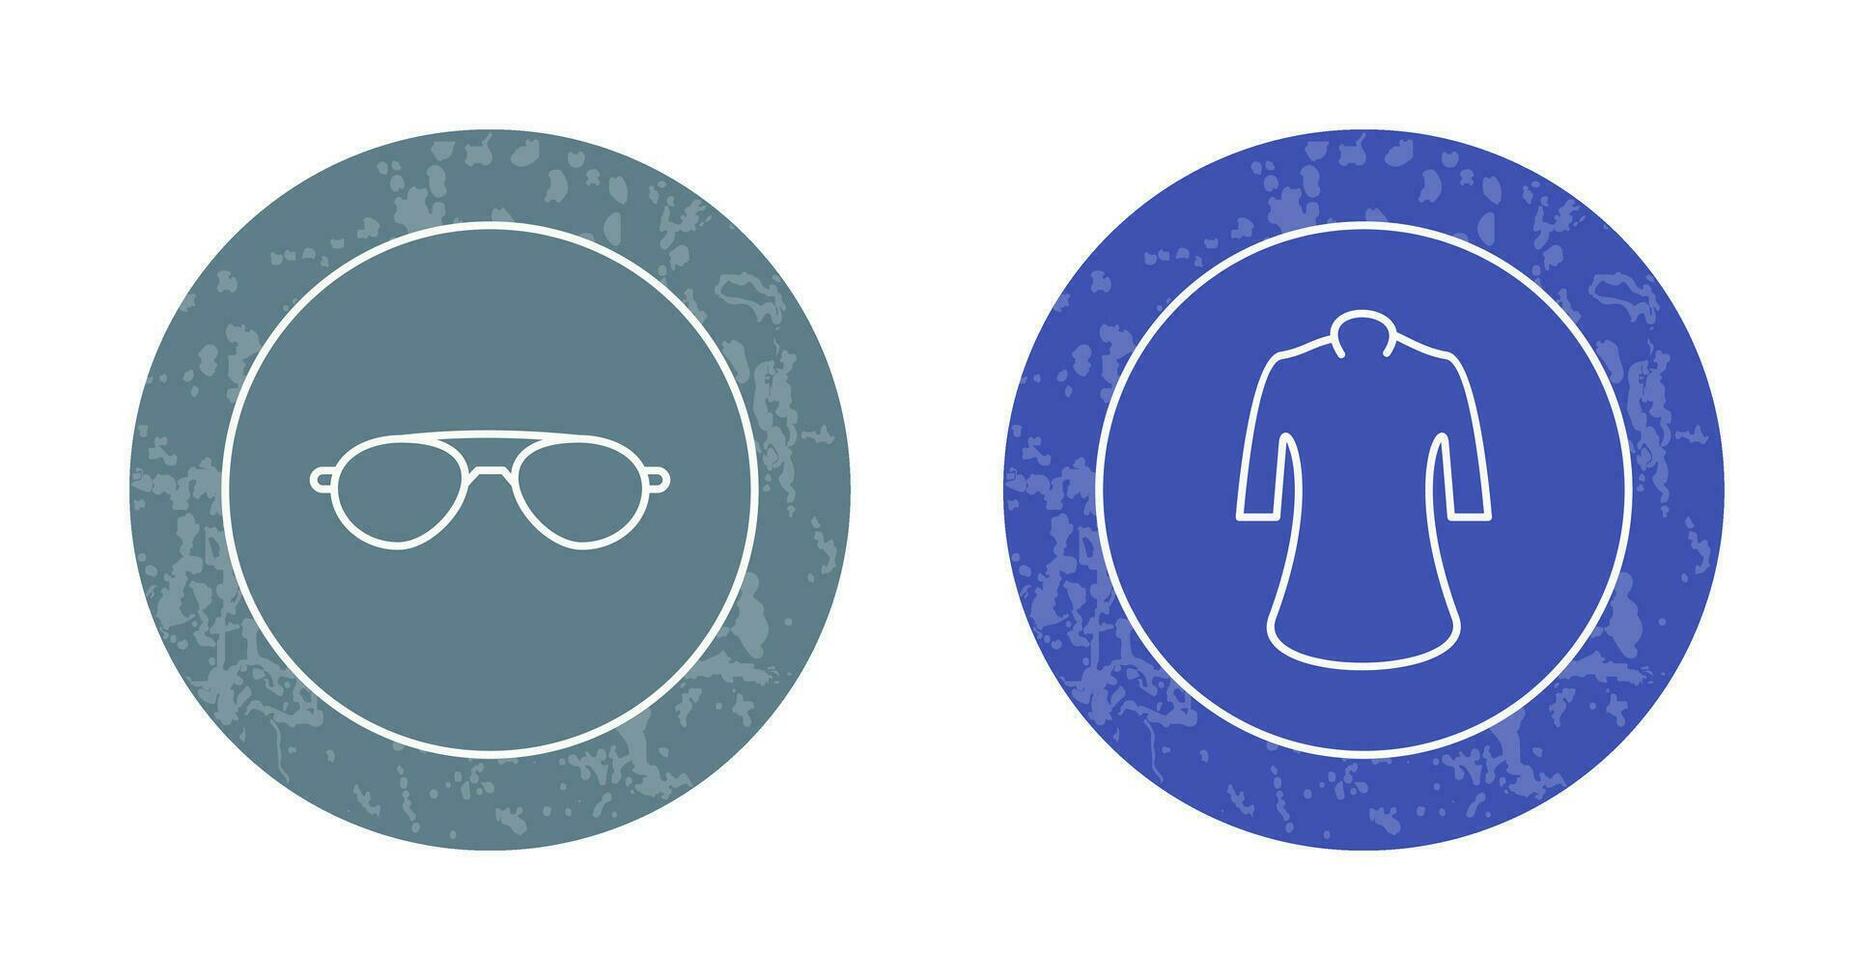 Ladies Shirt and Sunglasses Icon vector